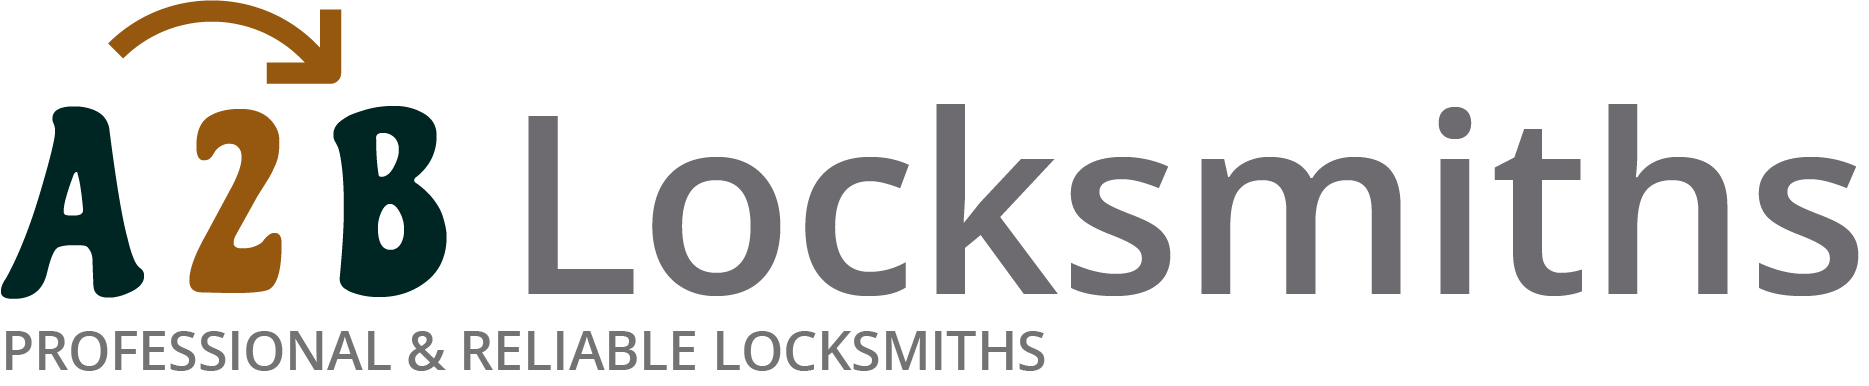 If you are locked out of house in Aylesbury Vale, our 24/7 local emergency locksmith services can help you.